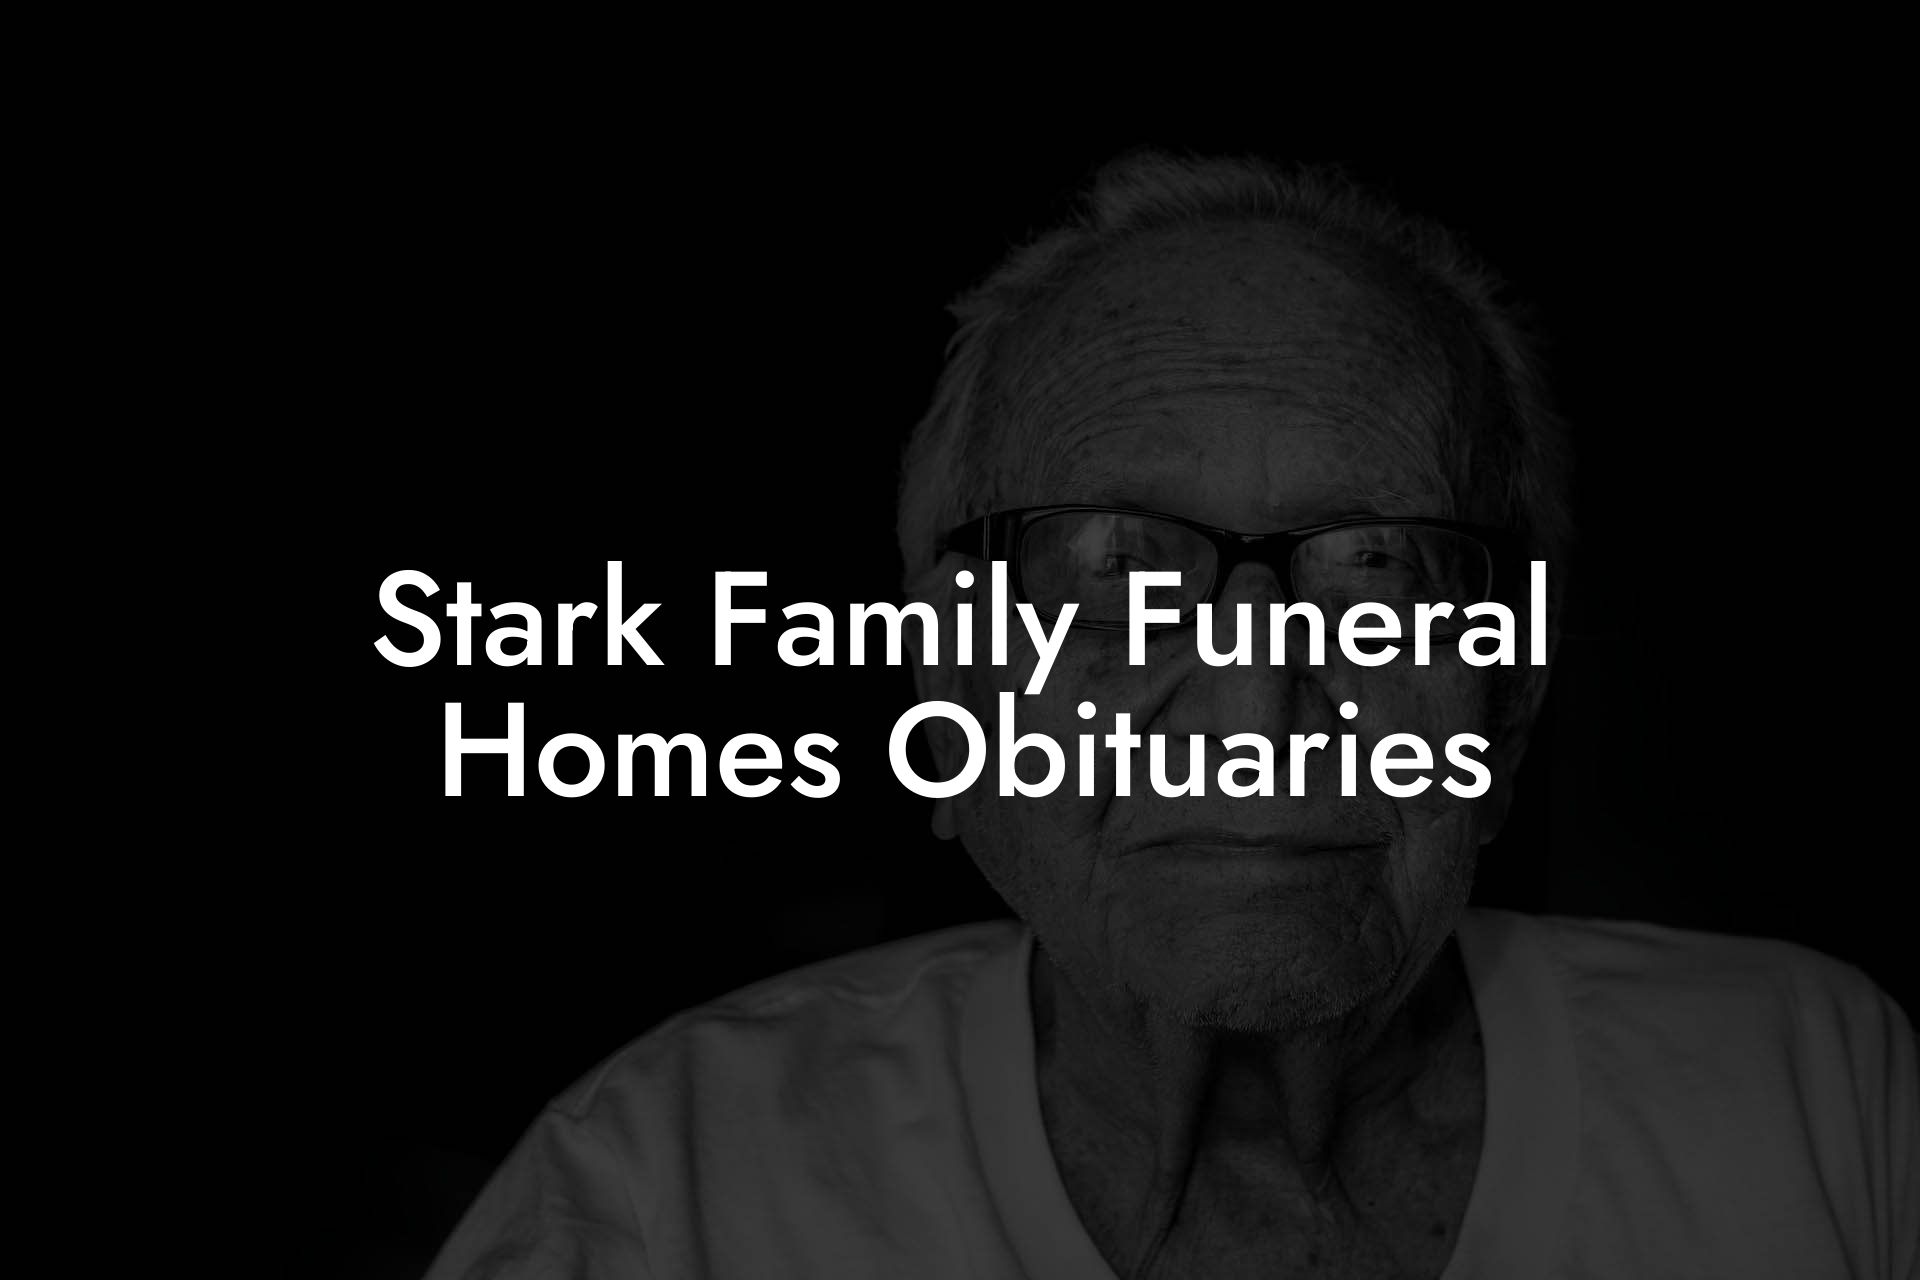 Stark Family Funeral Homes Obituaries